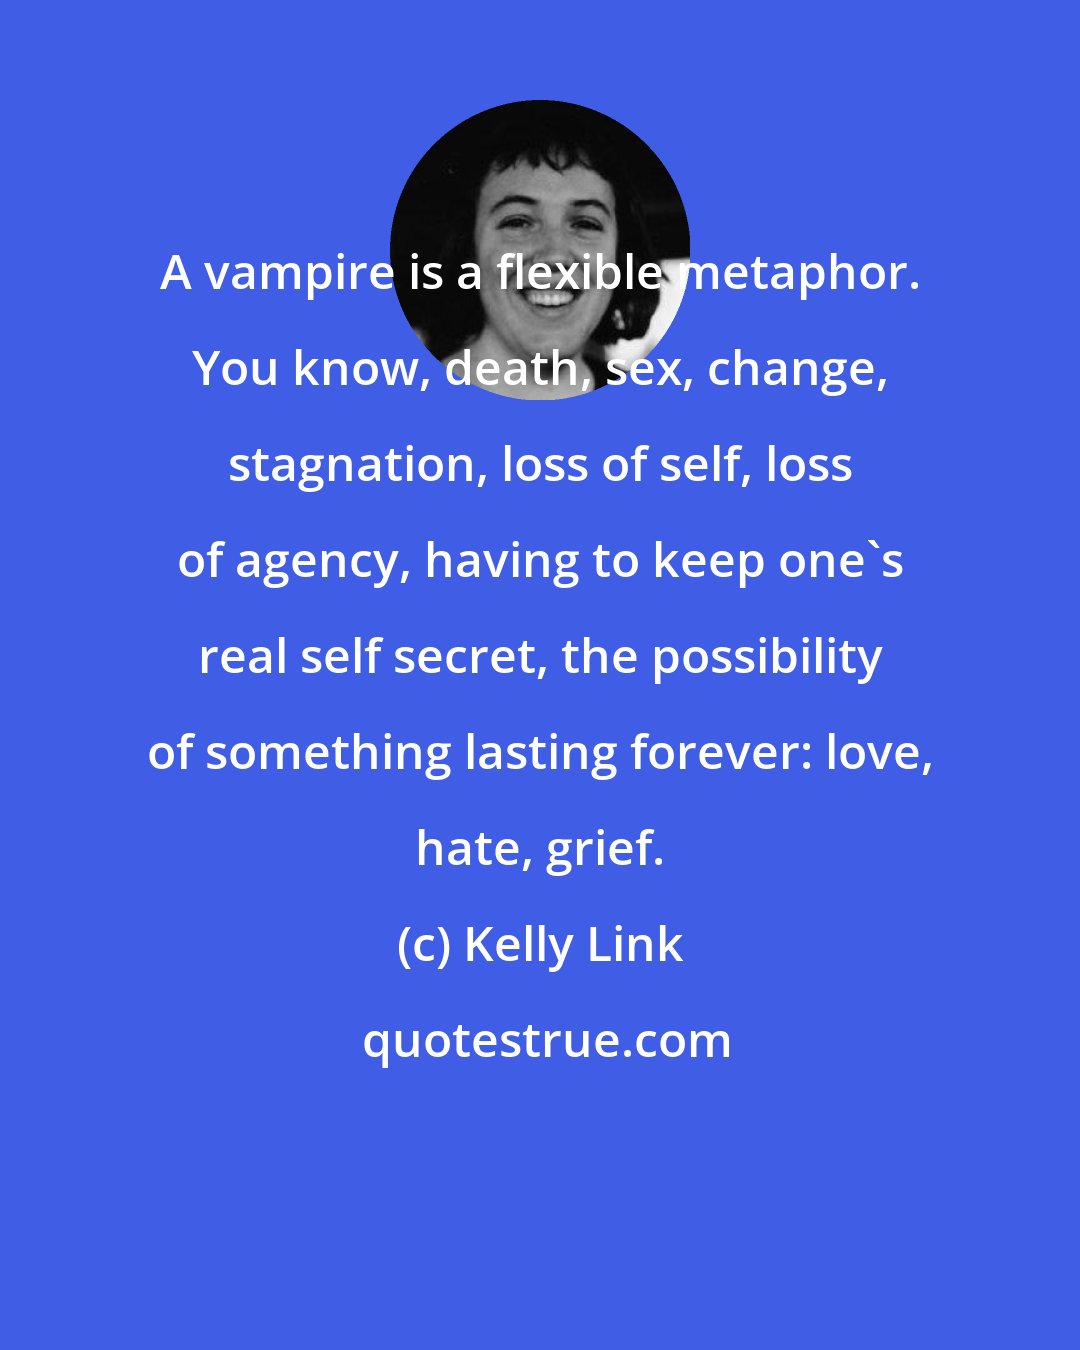 Kelly Link: A vampire is a flexible metaphor. You know, death, sex, change, stagnation, loss of self, loss of agency, having to keep one's real self secret, the possibility of something lasting forever: love, hate, grief.